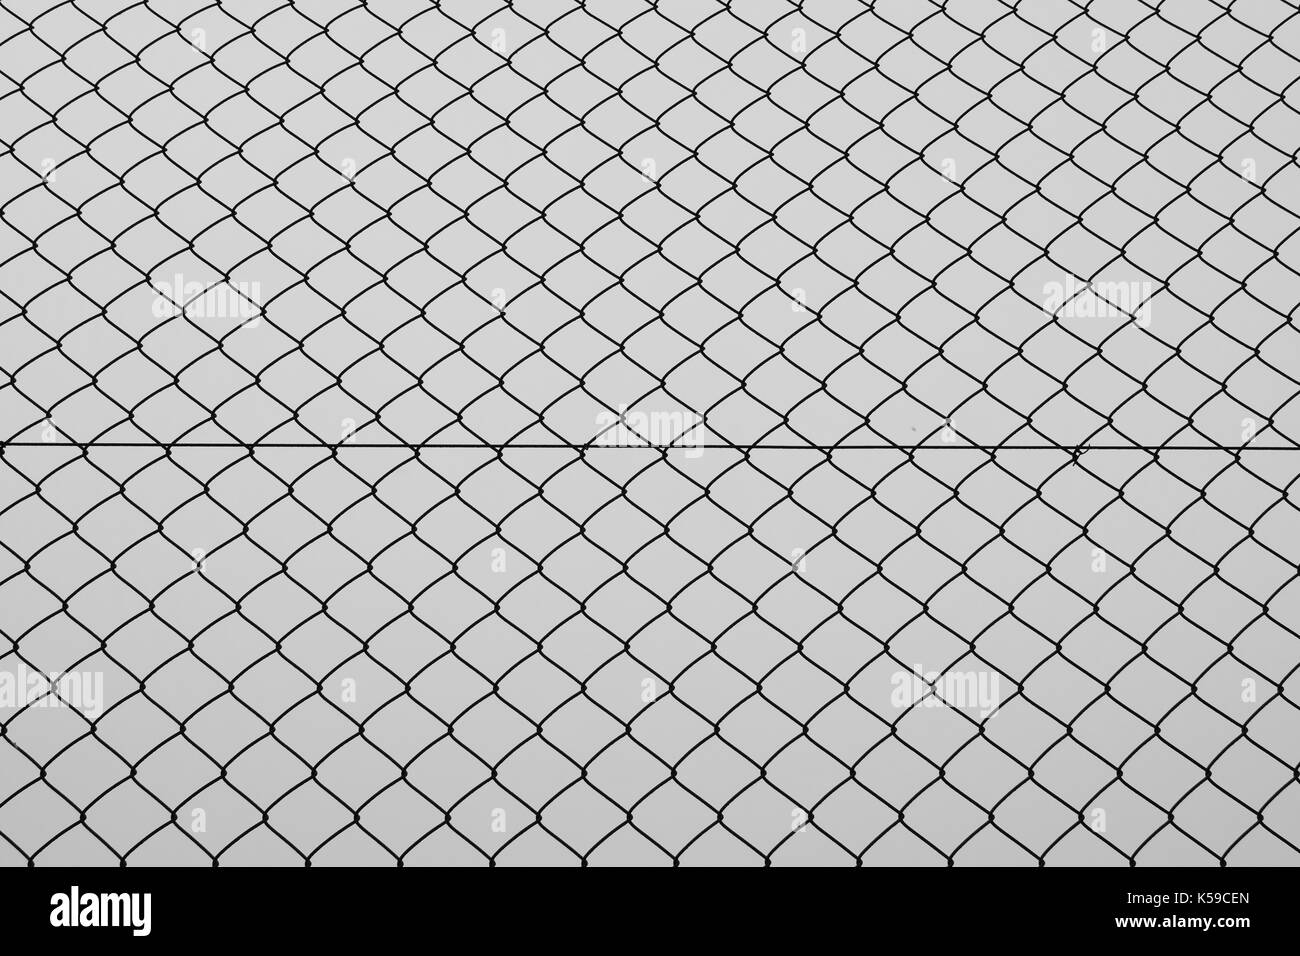 Chain link fencing iron wire mesh silhouette background texture. Abstract pattern black and white. Stock Photo